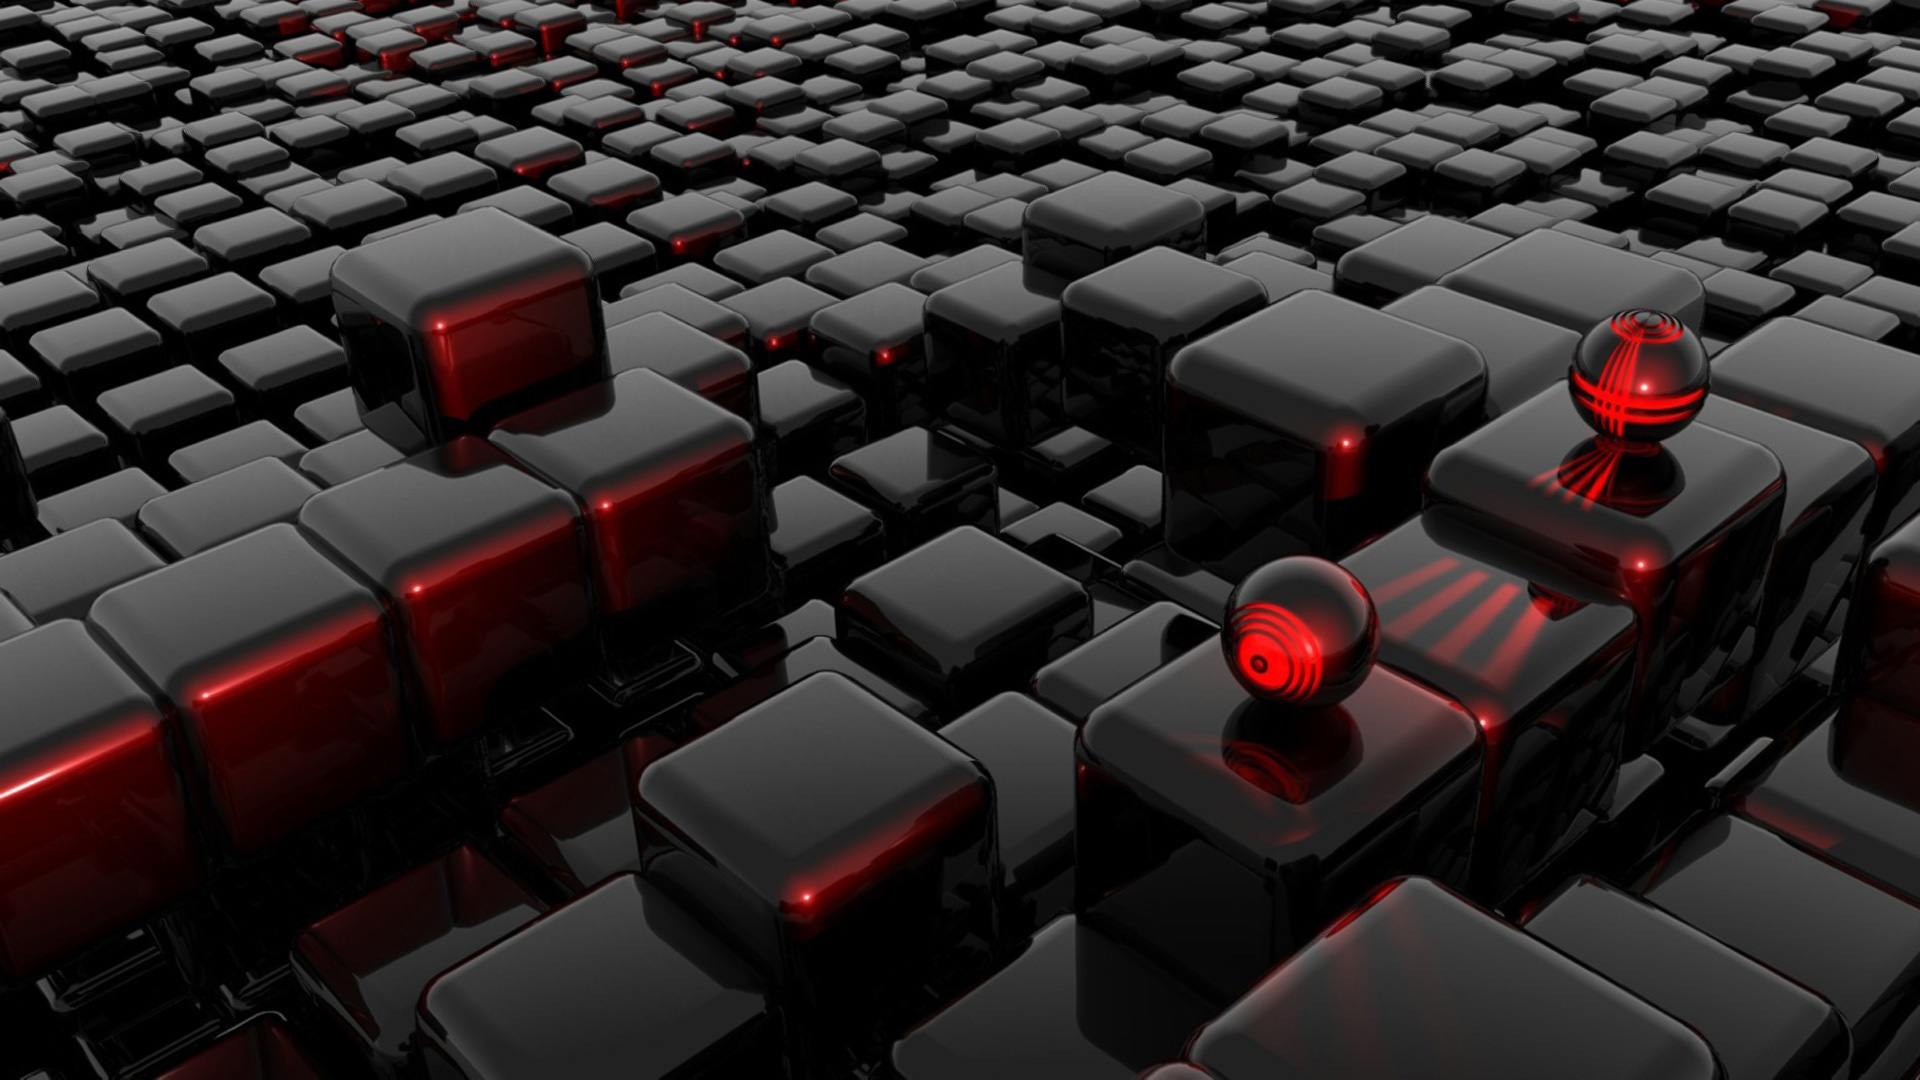 Ps3 Theme Wallpaper Really Nice - Black And Red Cubes - HD Wallpaper 